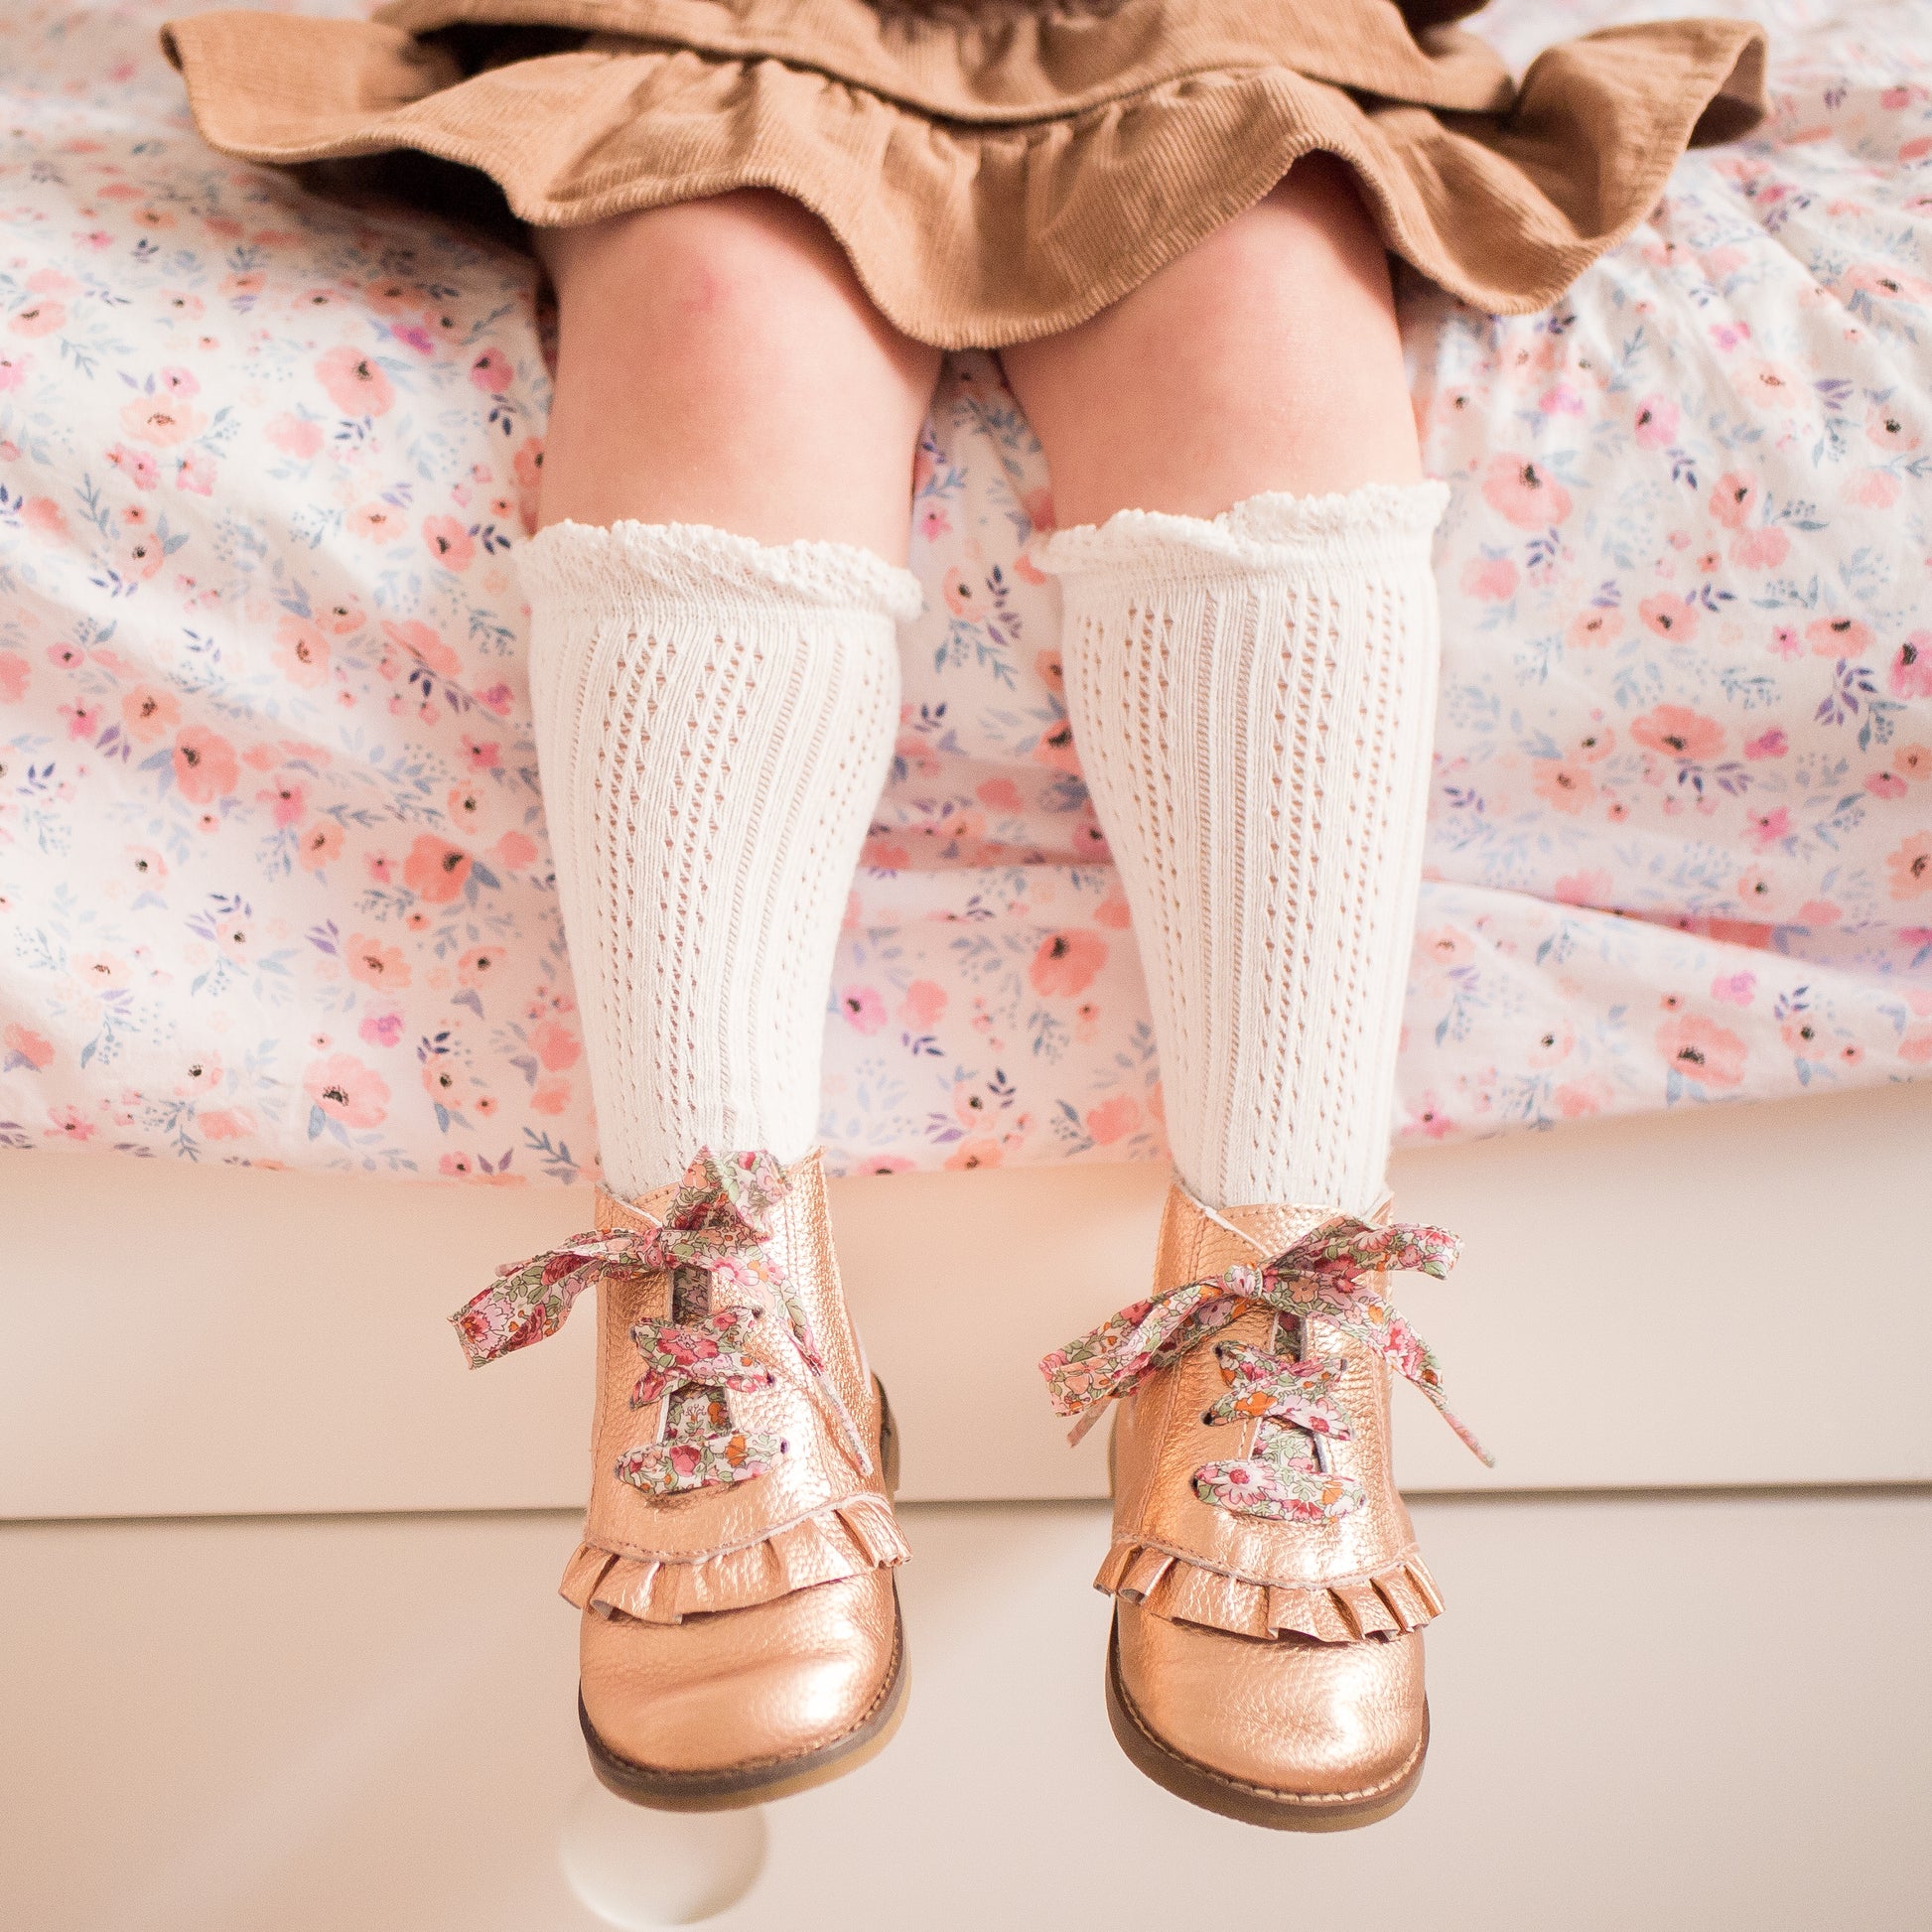 Toddler rose gold boots with liberty of london shoelaces